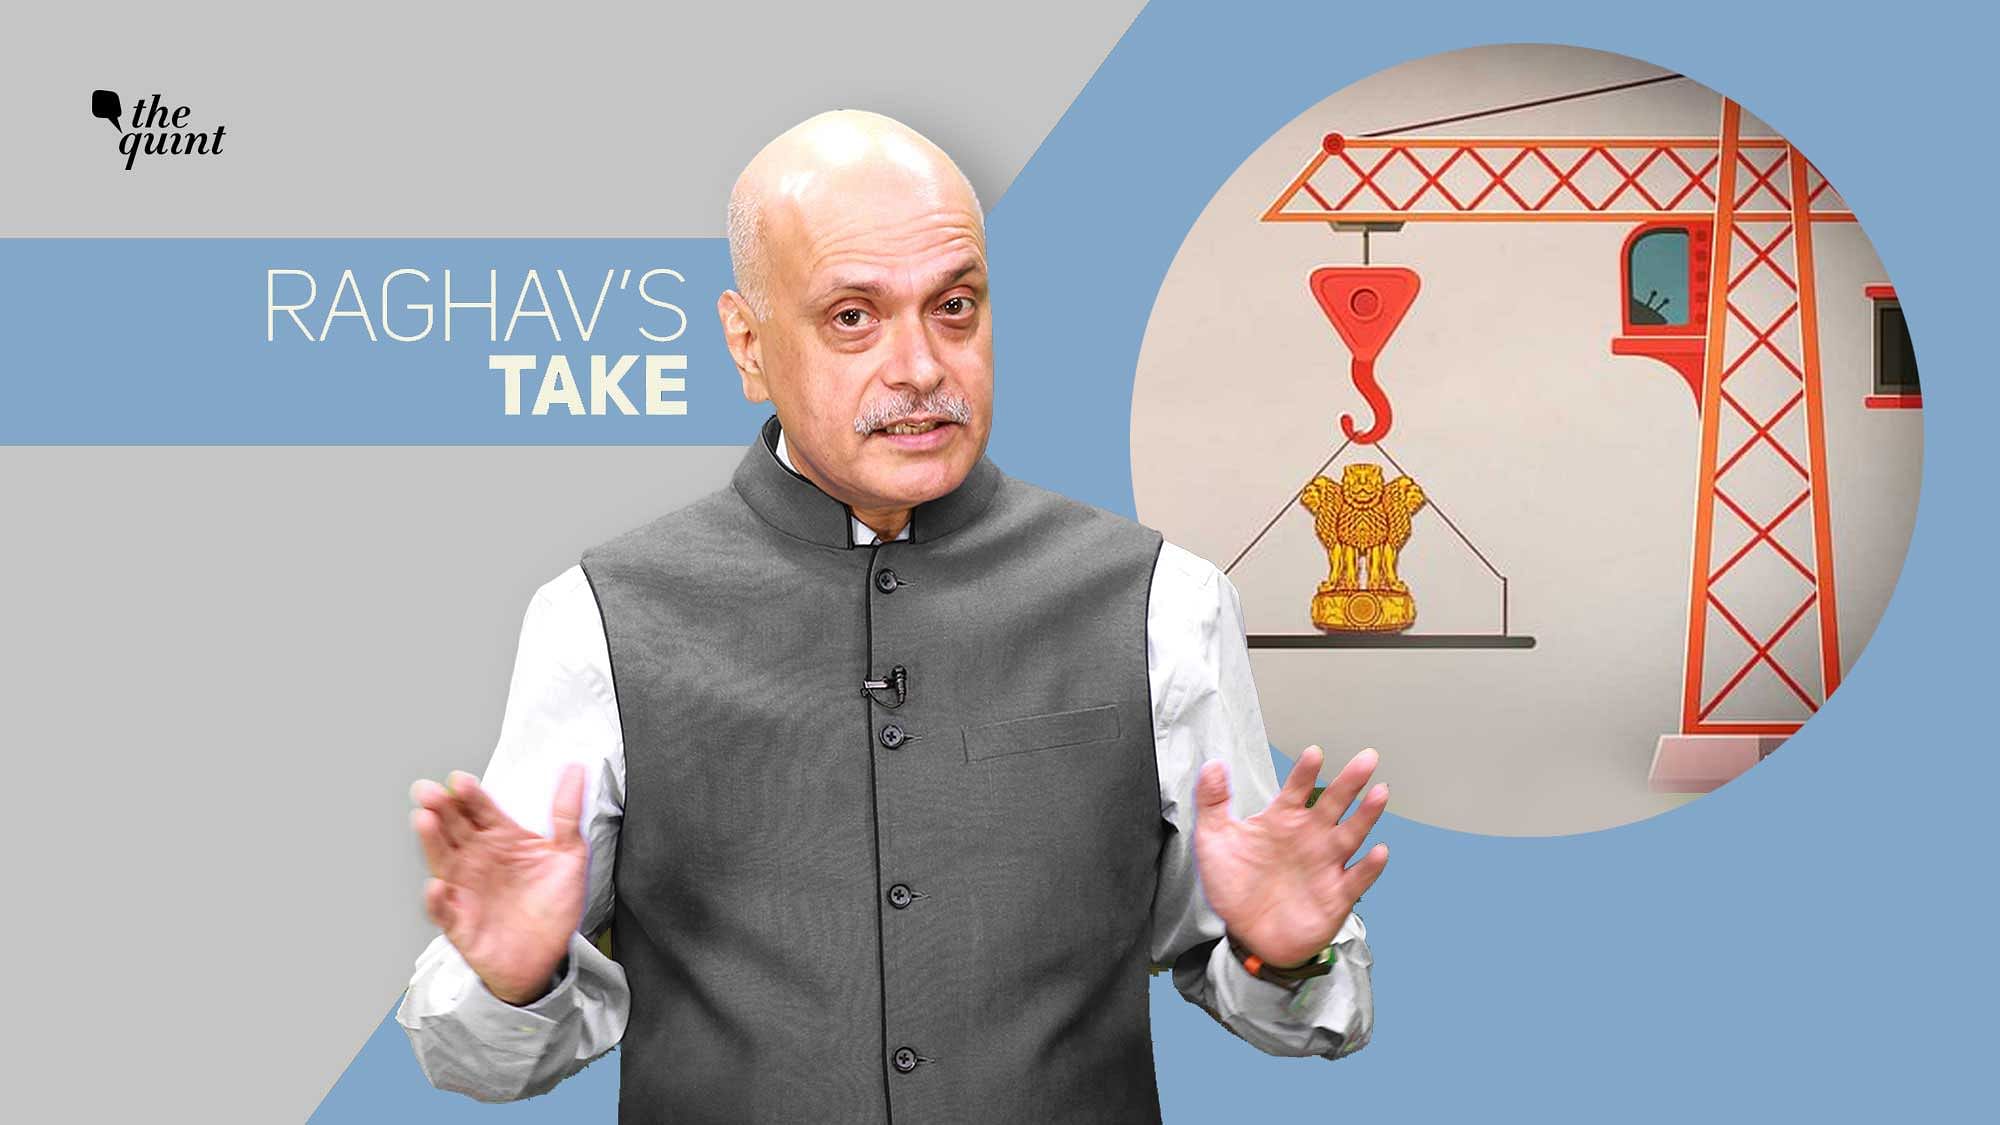 Image of The Quint’s Co-Founder &amp; Editor, Raghav Bahl, used for representational purposes.